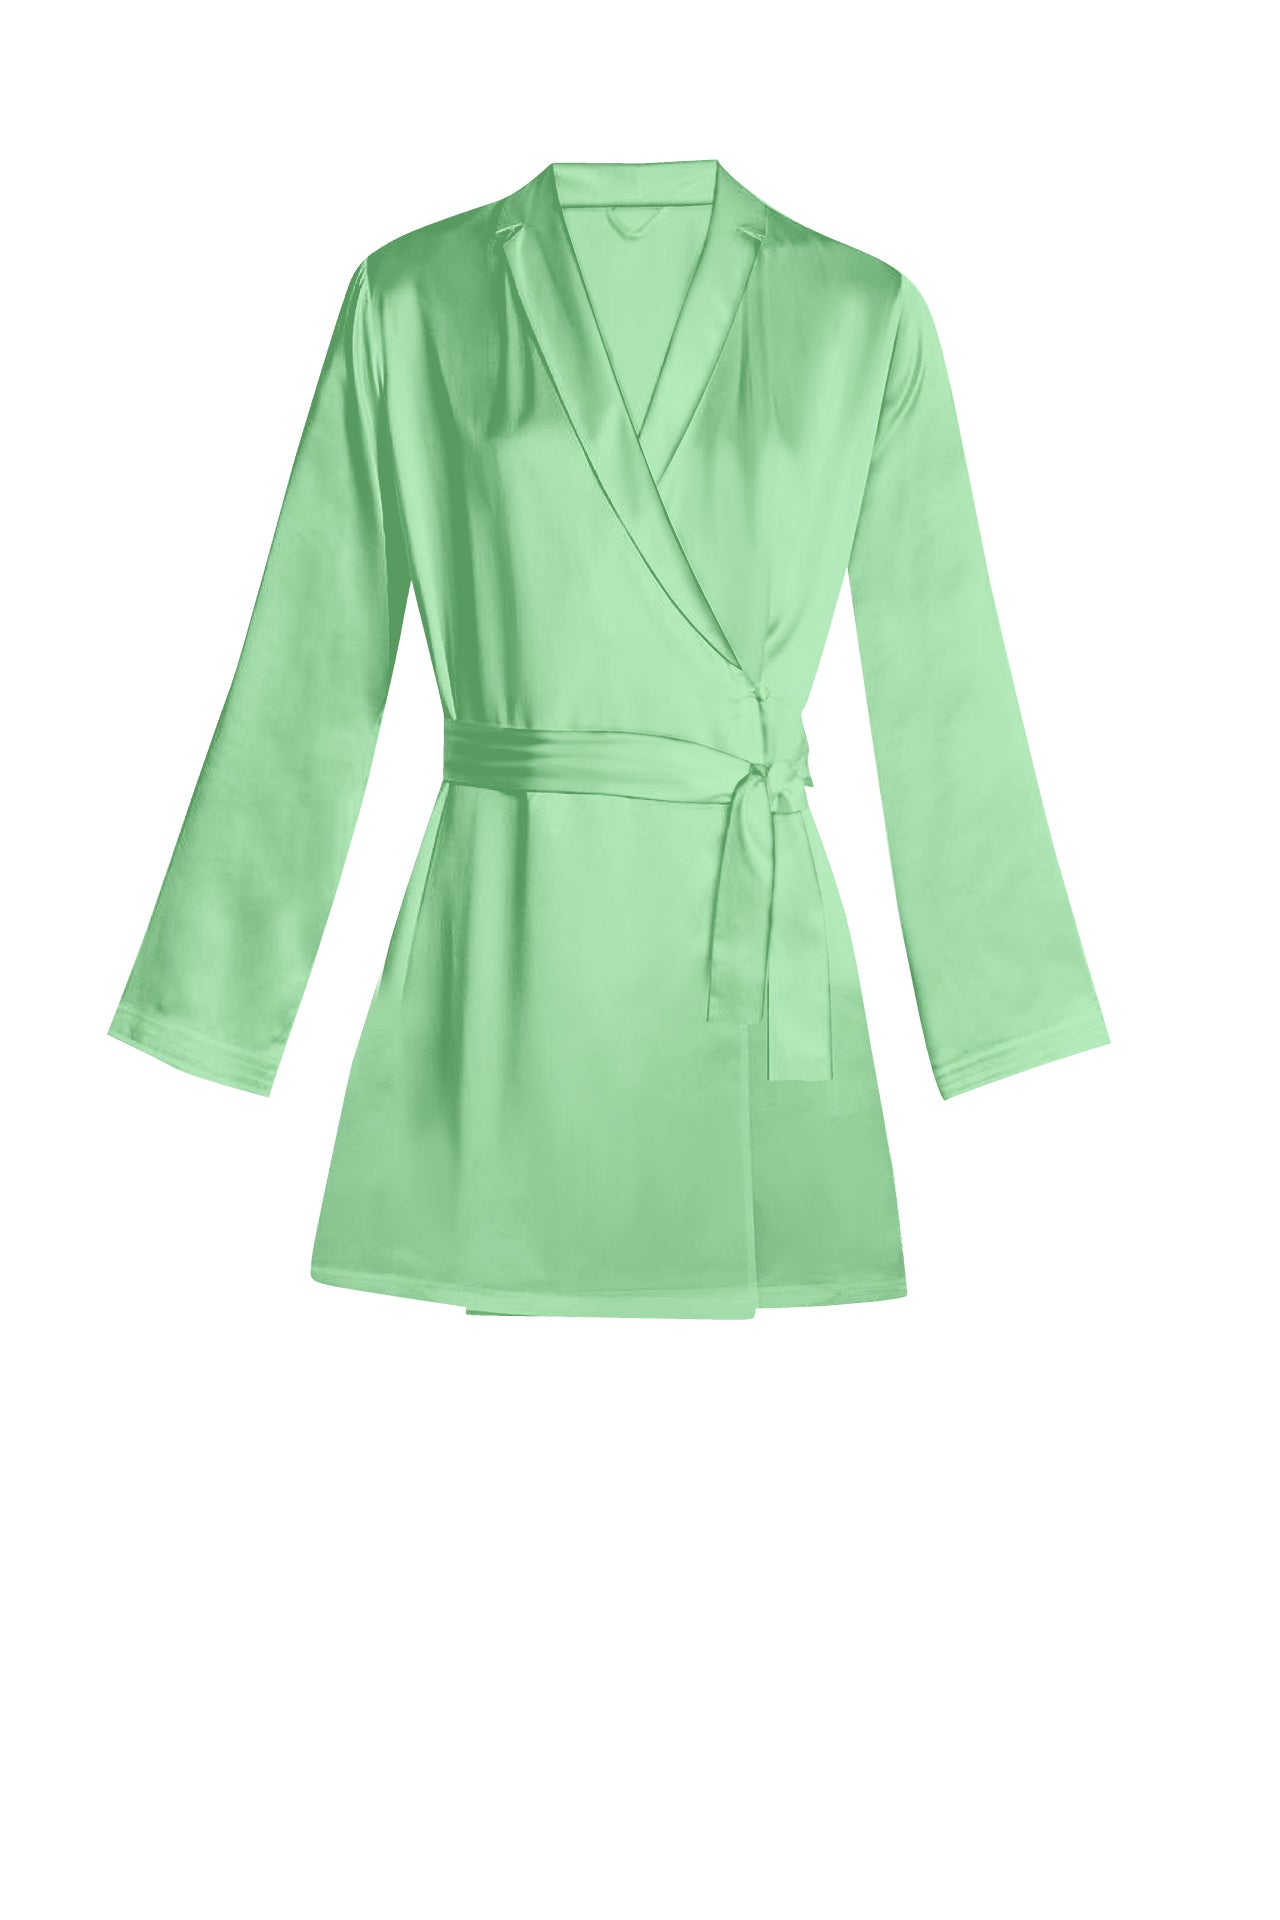 Made with Cupro in Mint Short Length Wrap Dress